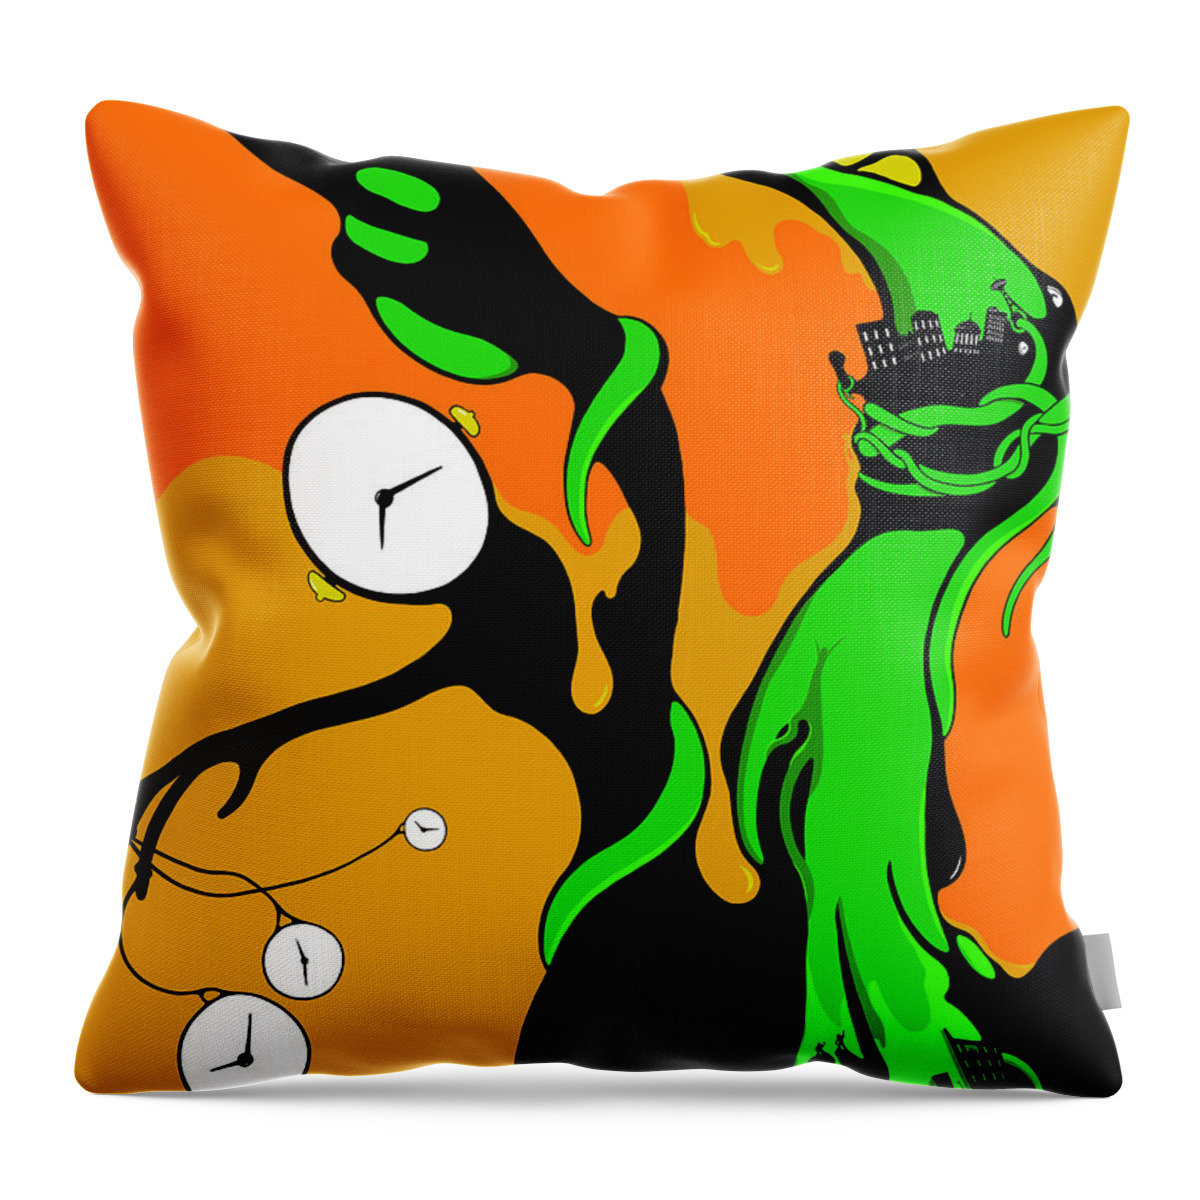 Vine Throw Pillow featuring the drawing Time Bandits by Craig Tilley